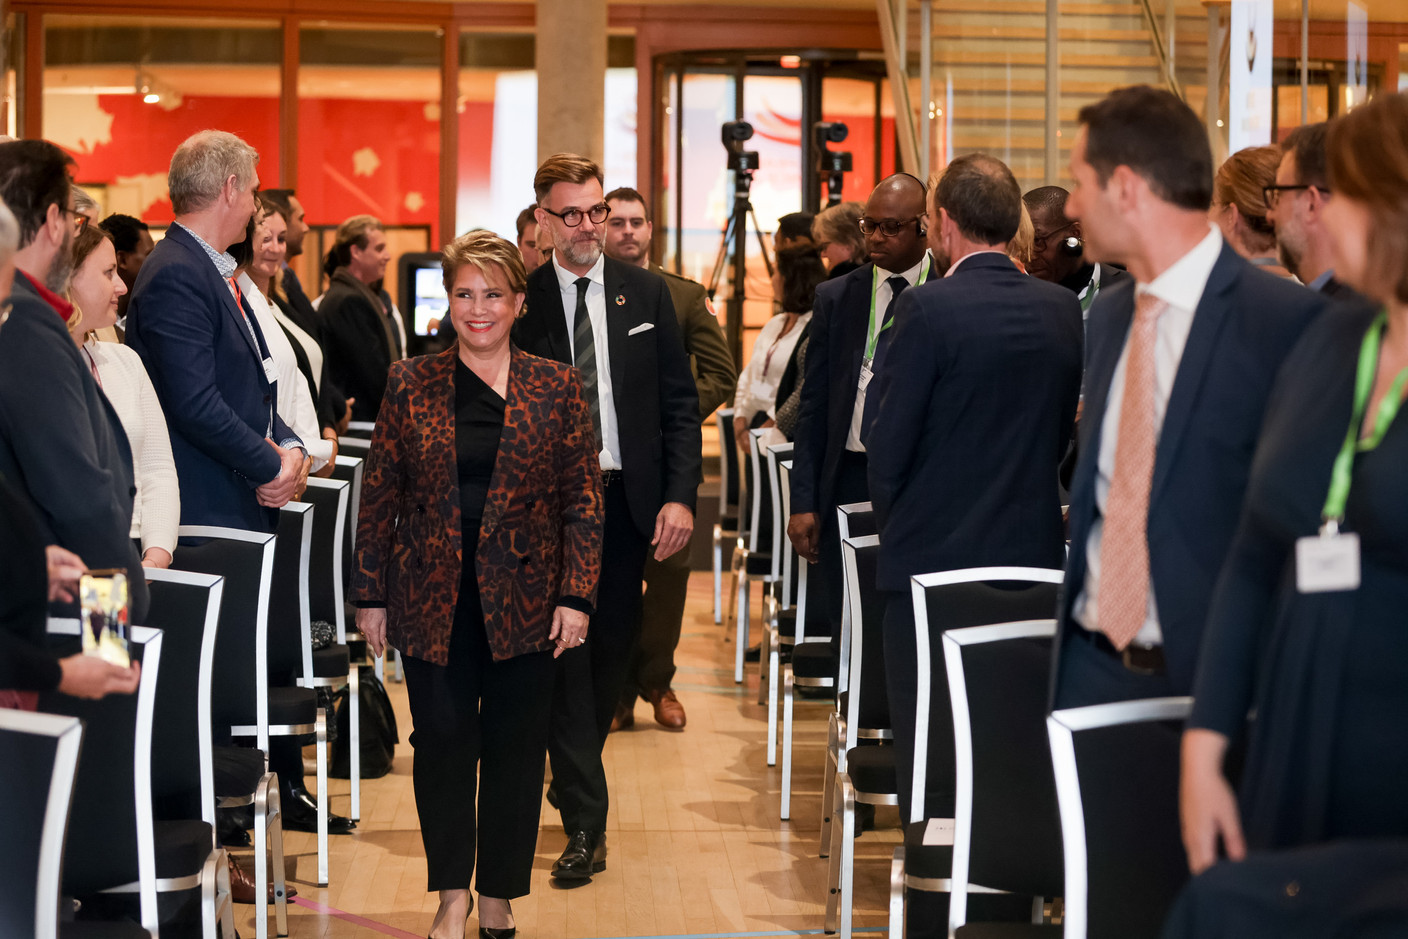 Day 2: Her Royal Highness the Grand Duchess and President of the High Jury and Minister Fayot entering the venue InFiNe.lu